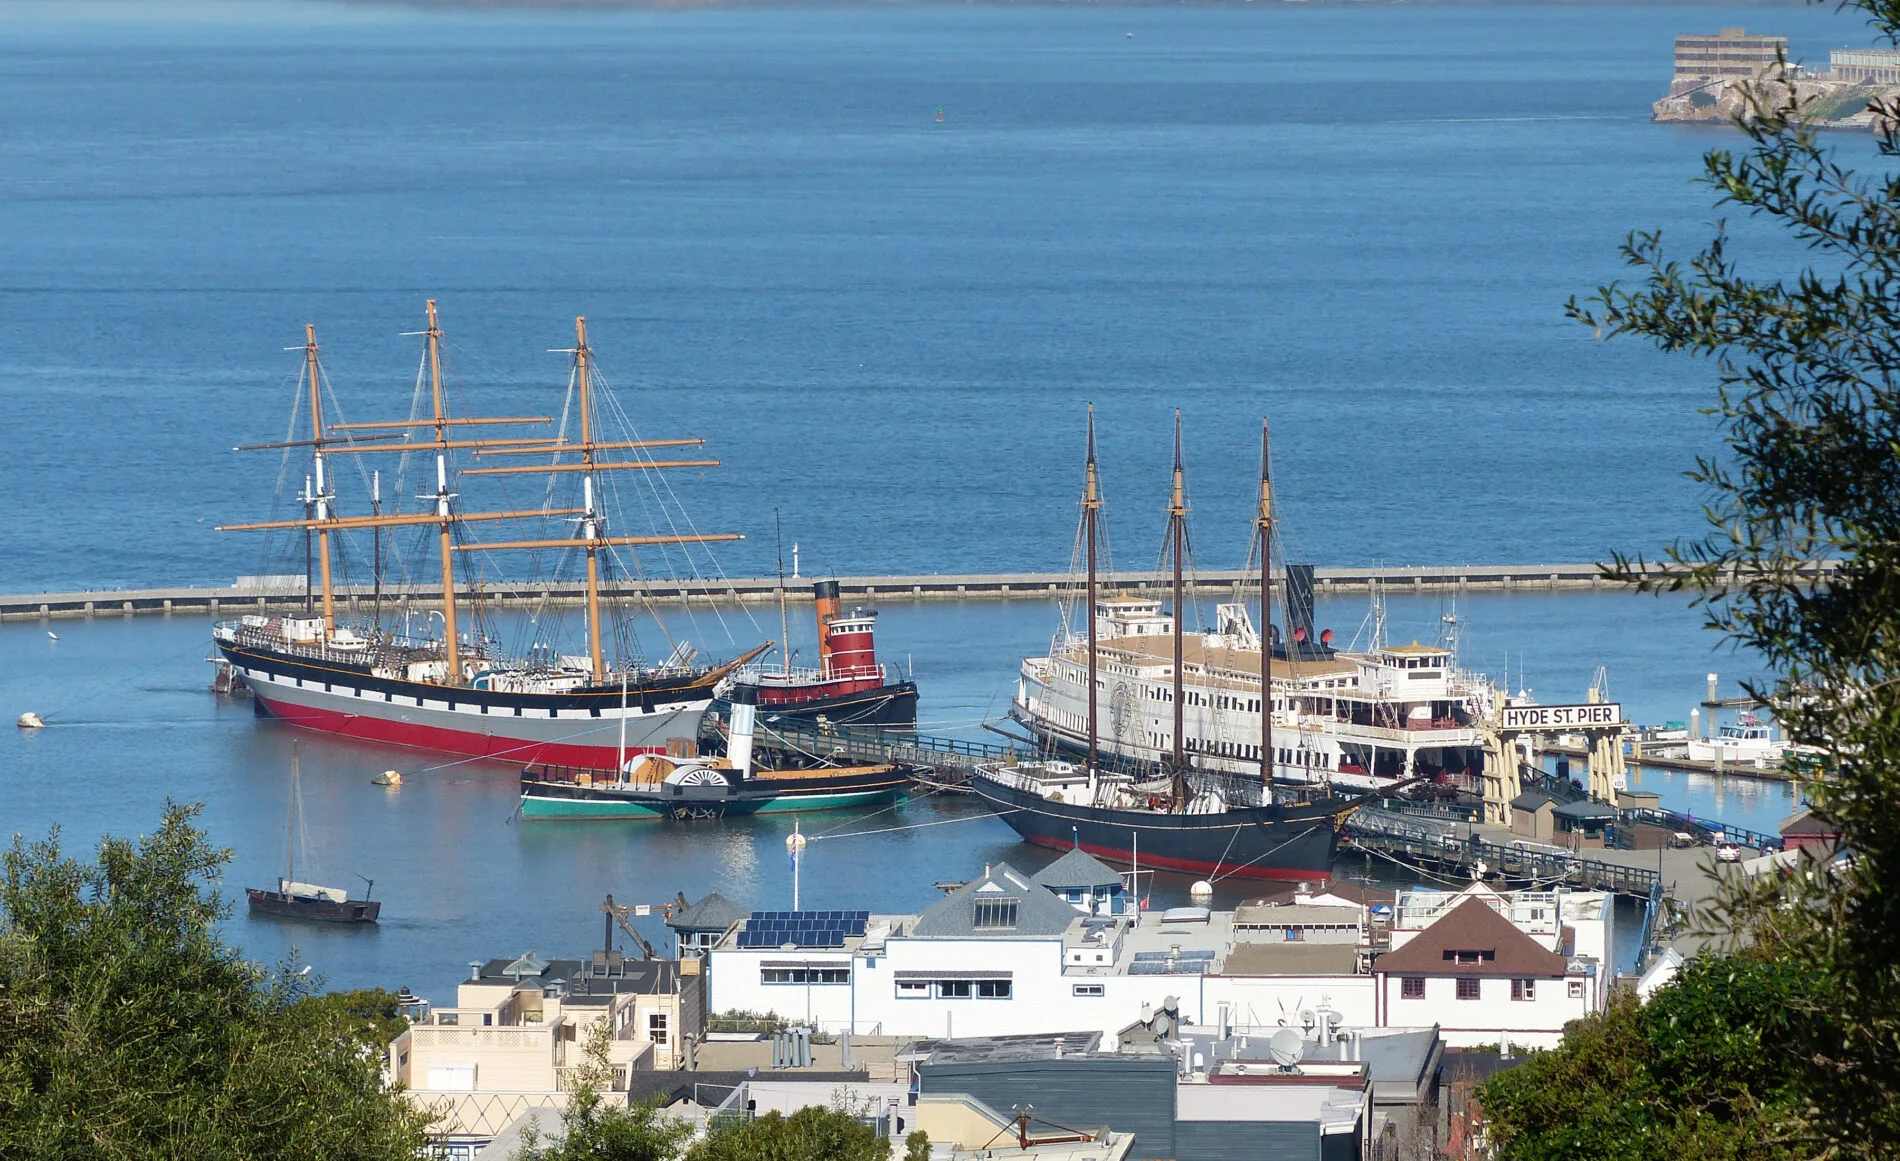 The Hyde Street Pier Museum collection of historic vessels including a 1903 three-masted schooner and an 1886 square-rigger.